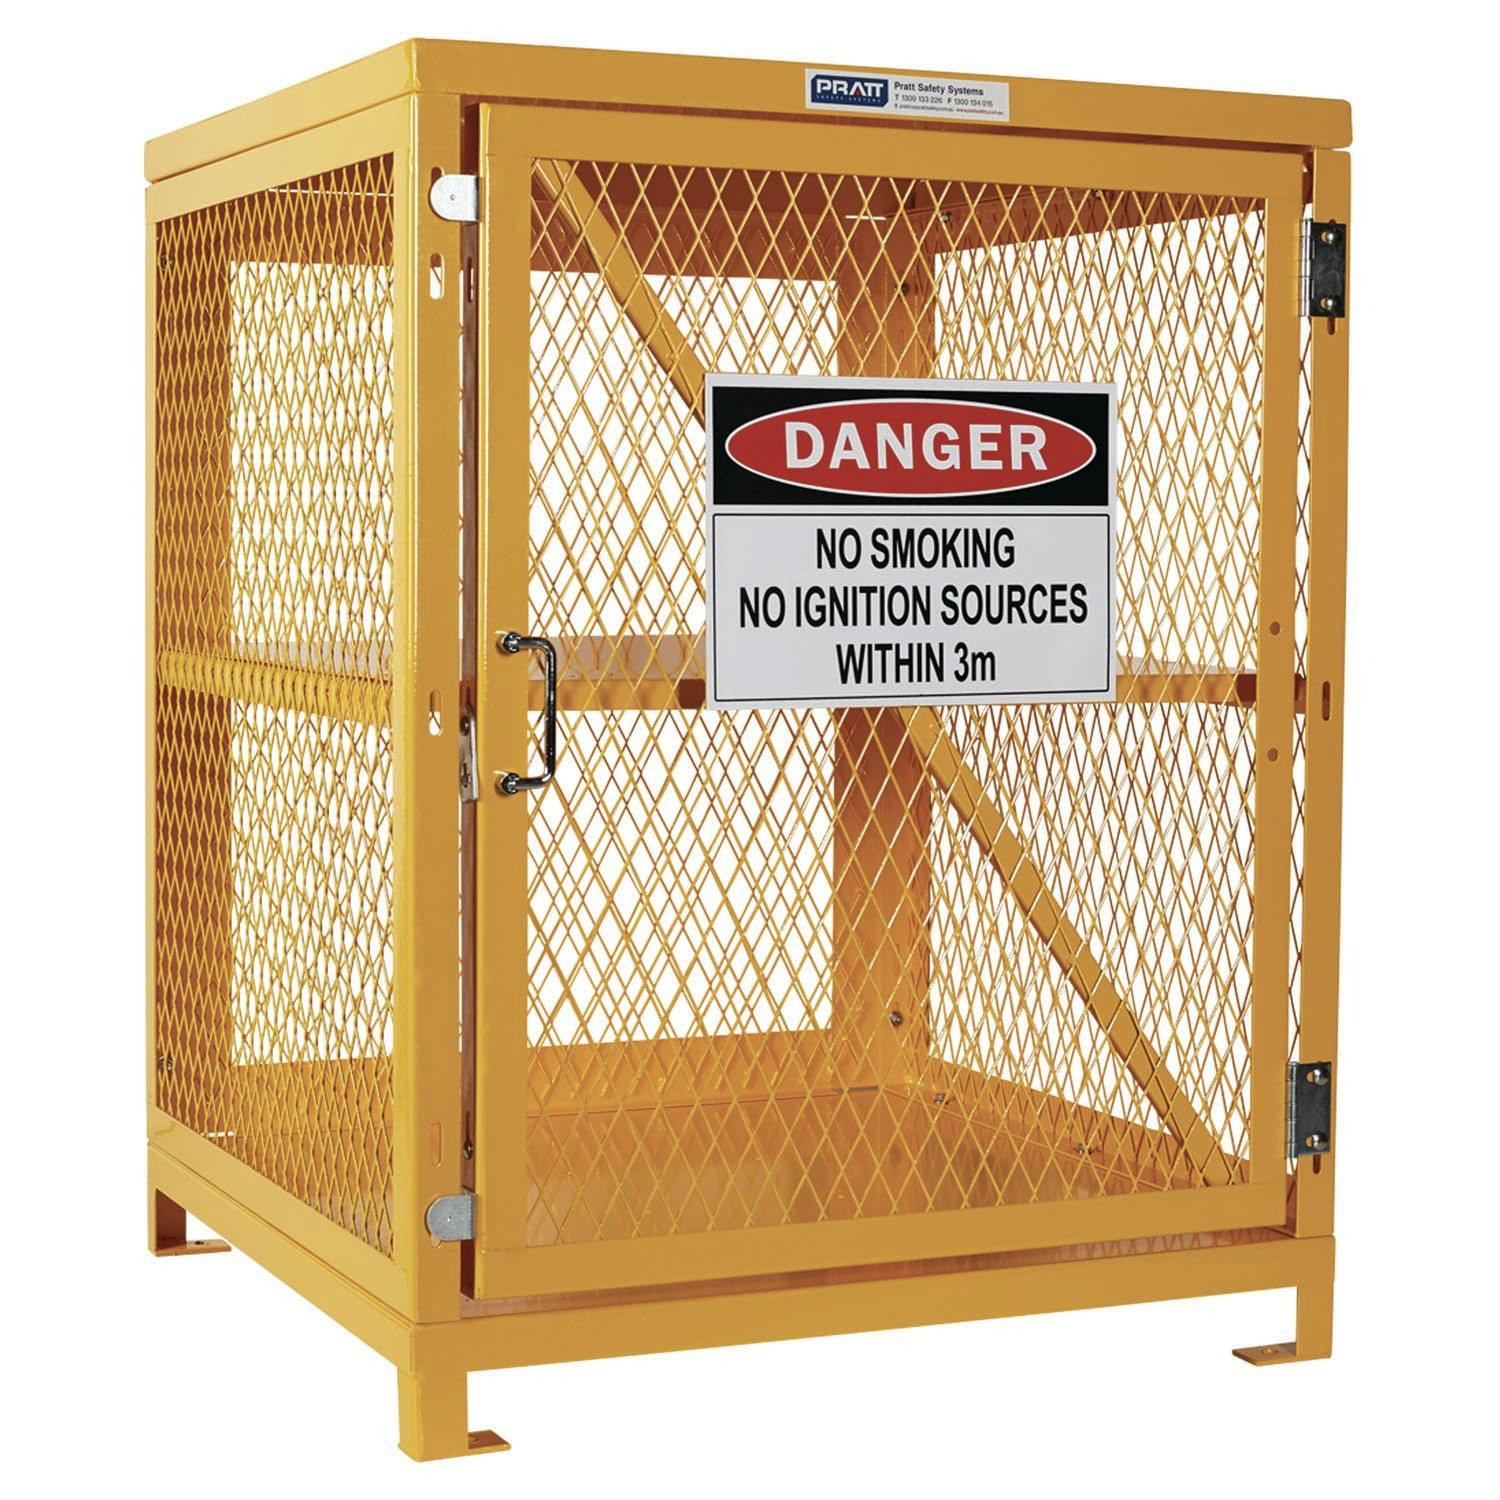 Pratt Aerosol Storage Cage. 2 Storage Levels Up To 200 Cans. (Comes Flat Packed - Assembly Required)